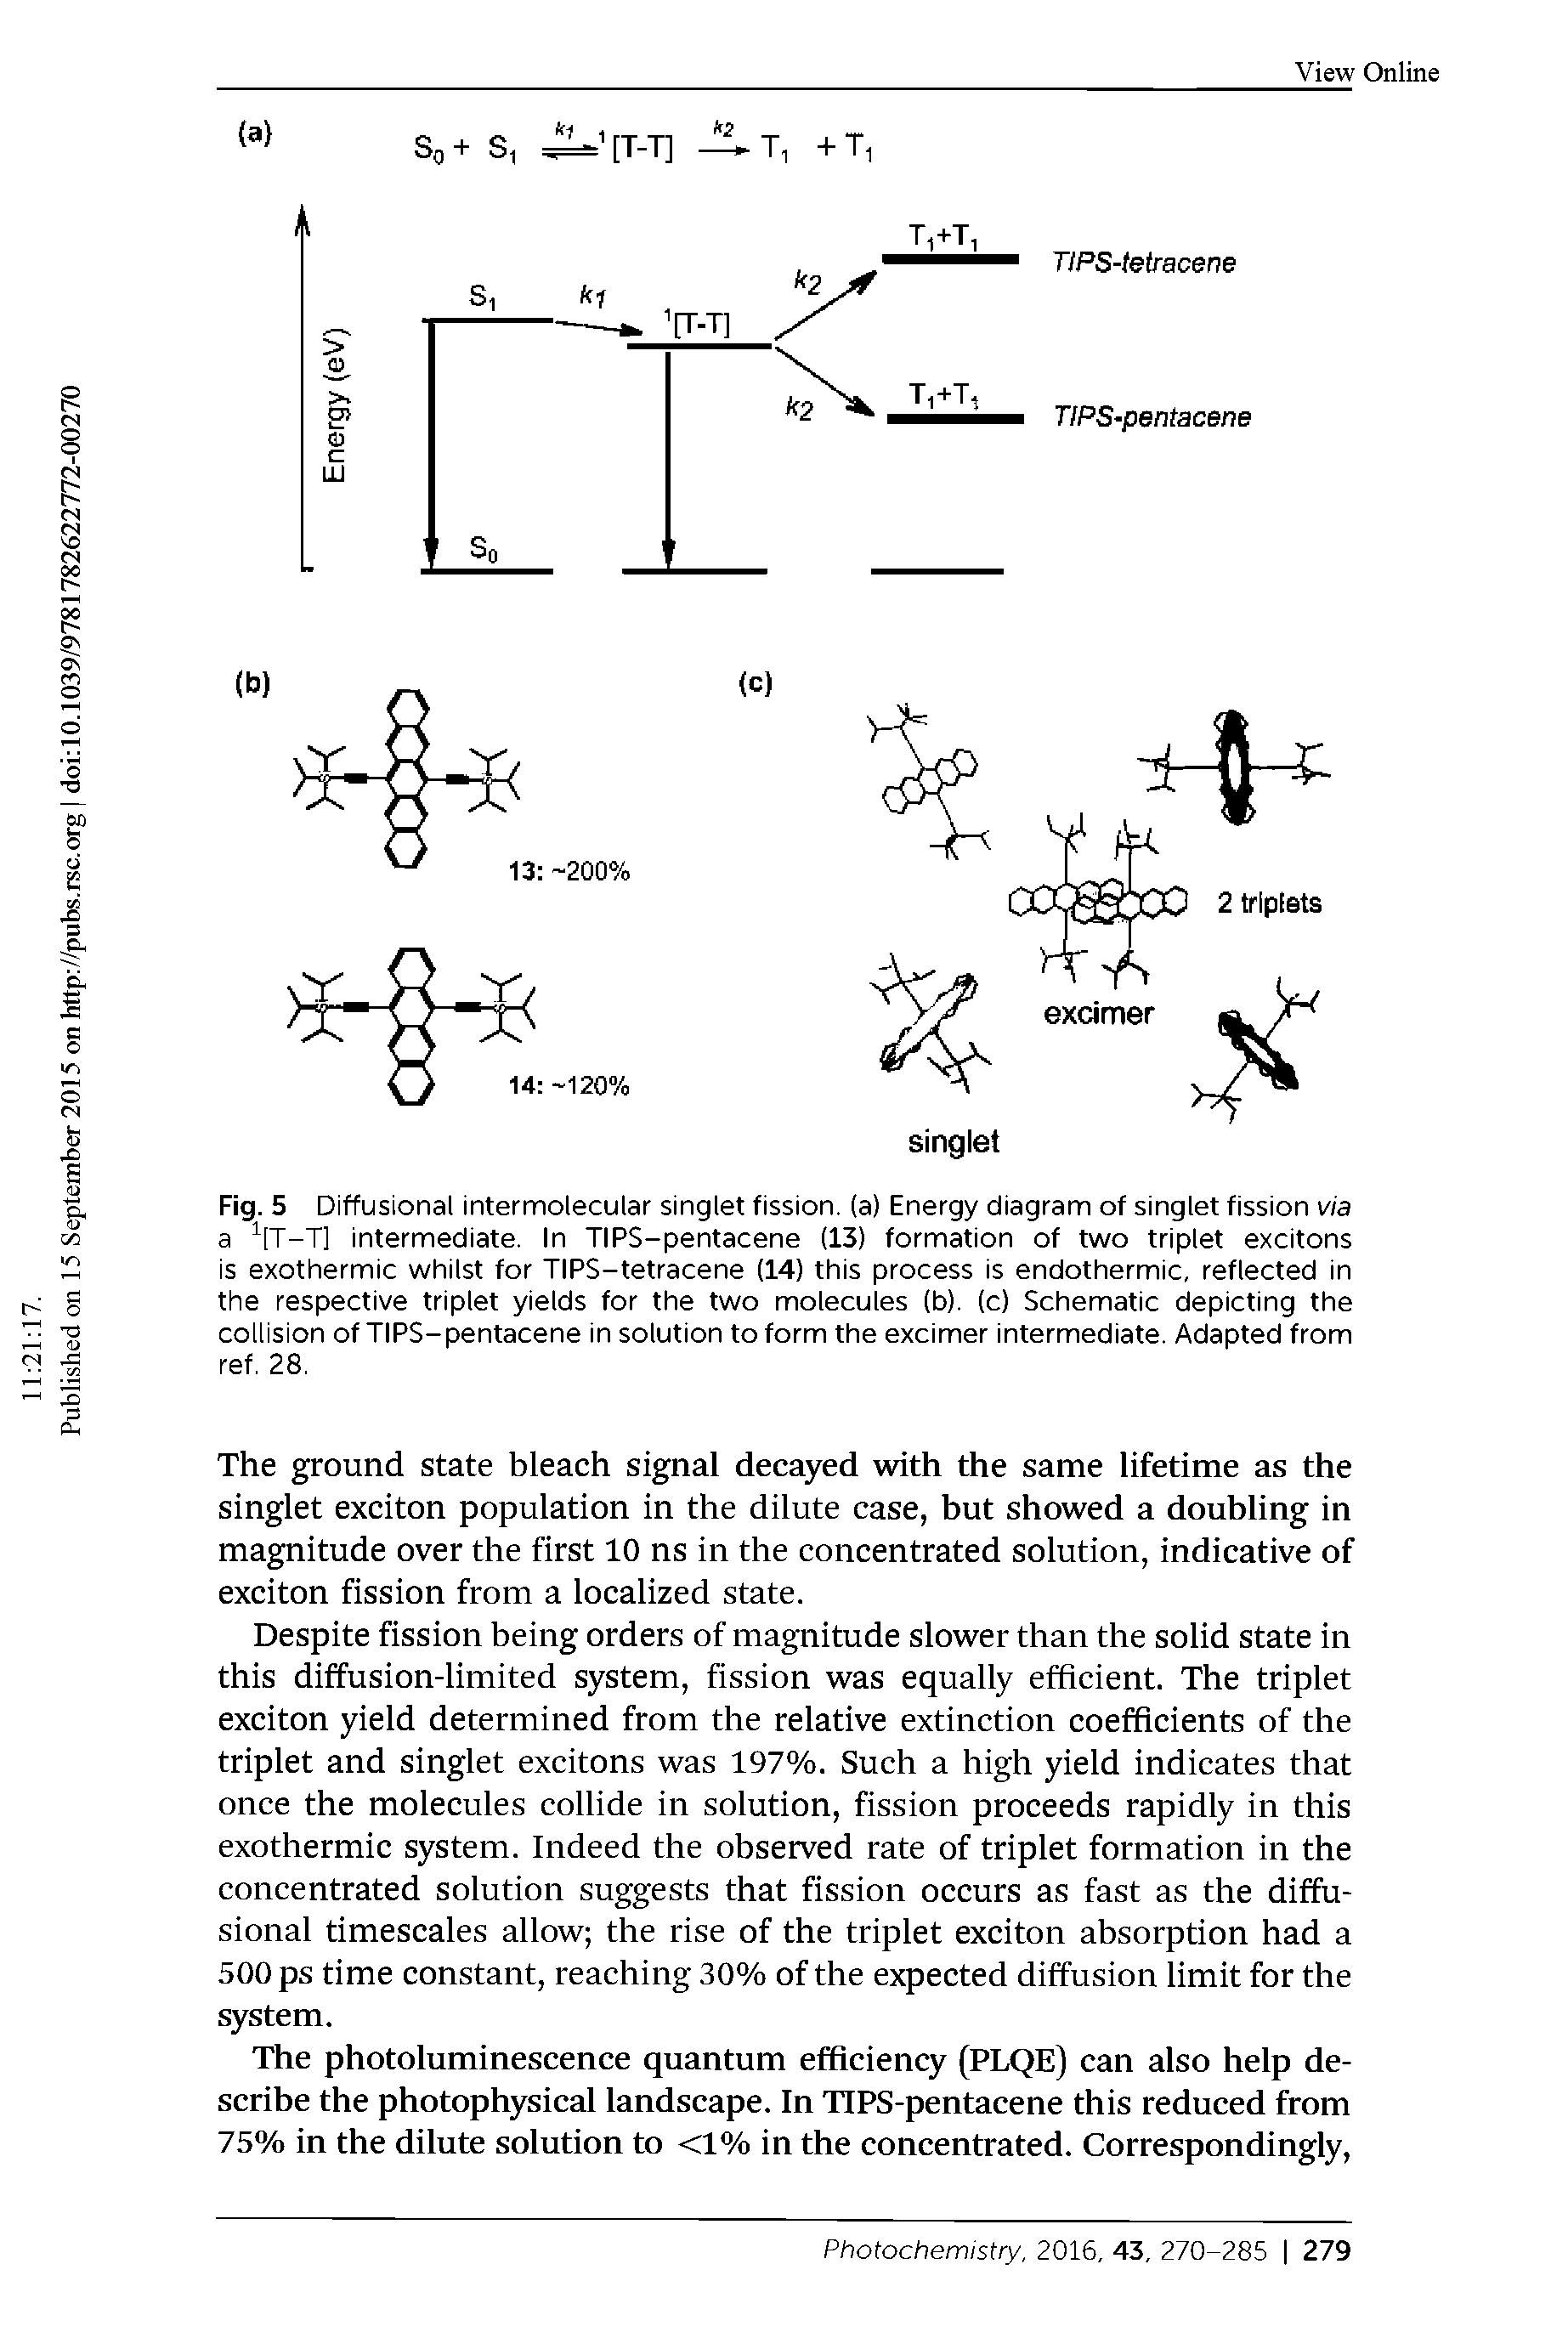 Fig. 5 Diffusional intermolecular singlet fission, (a) Energy diagram of singlet fission via a [T-T] intermediate. In TIPS-pentacene (13) formation of two triplet excitons is exothermic whilst for TIPS-tetracene (14) this process is endothermic, reflected in the respective triplet yields for the two molecules (b). (c) Schematic depicting the collision of TIPS-pentacene in solution to form the excimer intermediate. Adapted from ref, 28,...